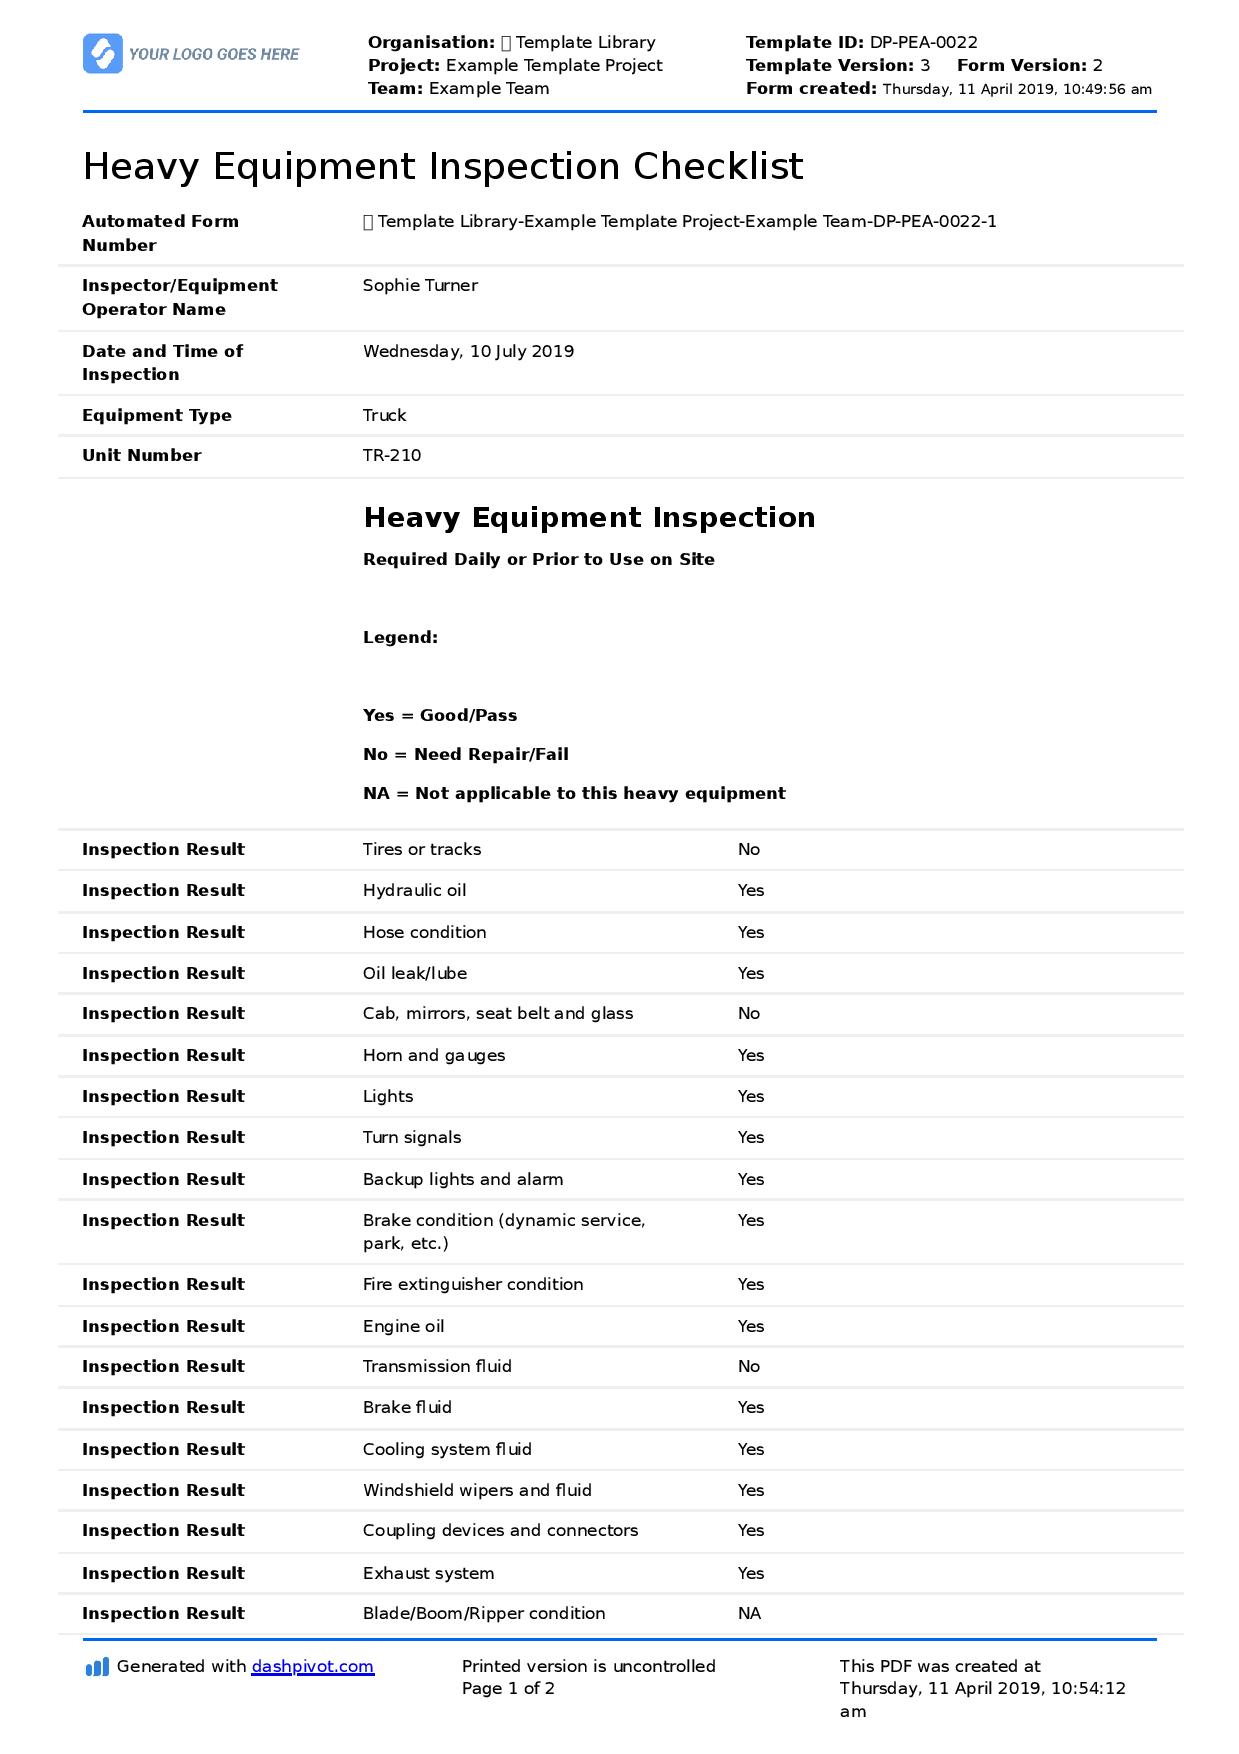 Heavy Equipment Inspection Checklist template (Free editable form) For Daily Equipment Checklist Template Within Daily Equipment Checklist Template